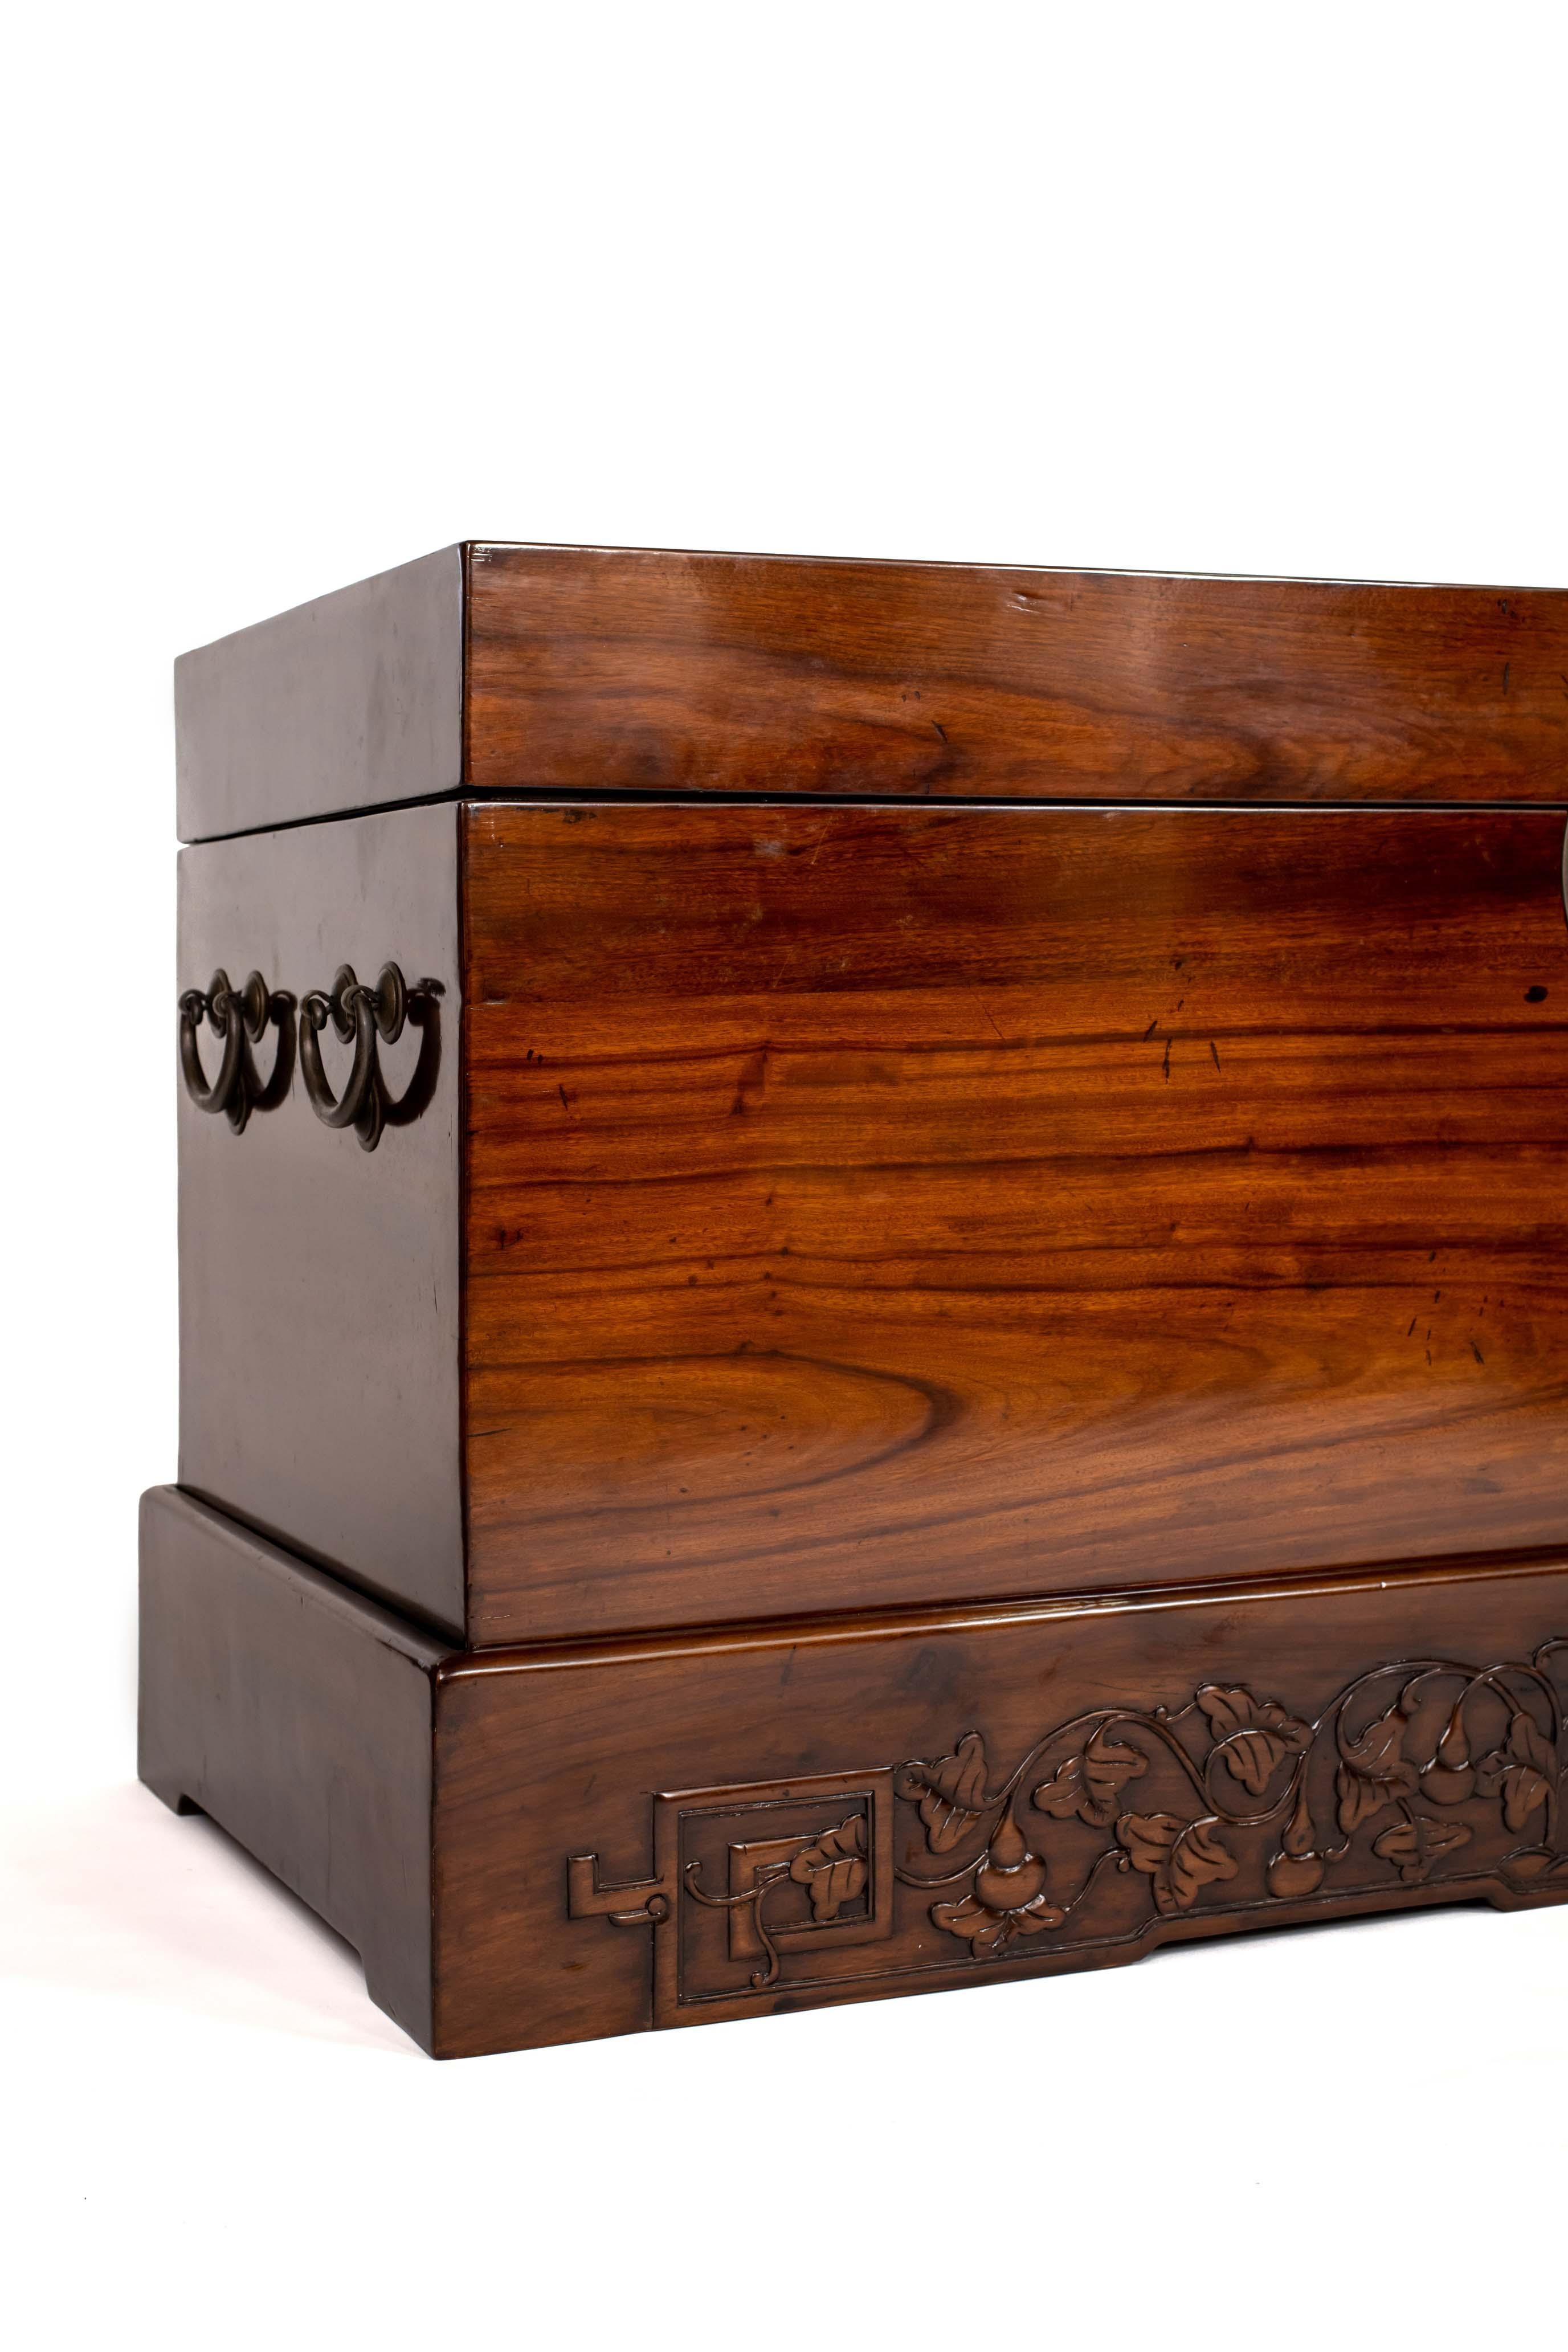 Of rectangular form, the chest with wood of smoothly-grained texture, warn tone and attractive patina, round brass lock plate set flush, mounted with the front continuing over the lid, the top lid lifting open to an interior with an open storage